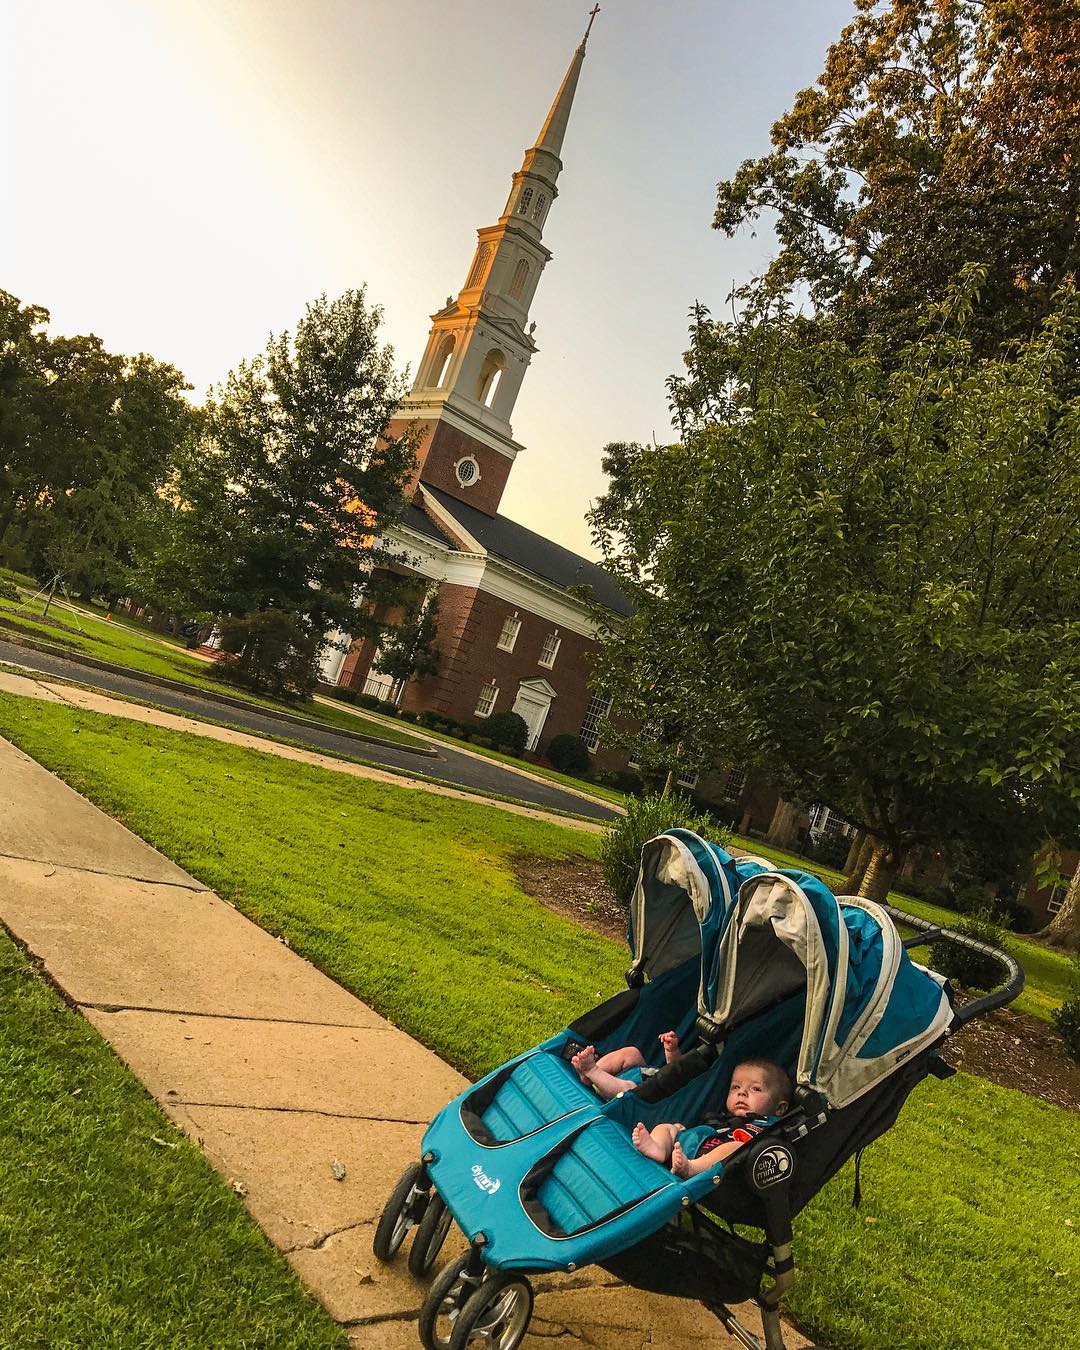 Just an evening walk with the boys! I am so fortunate to live in such close proximity to my office, downtown Anderson, and our church where a short walk takes you right to our community gathering places! Love the life of small town America! #camerapapa #bbc #twinslife